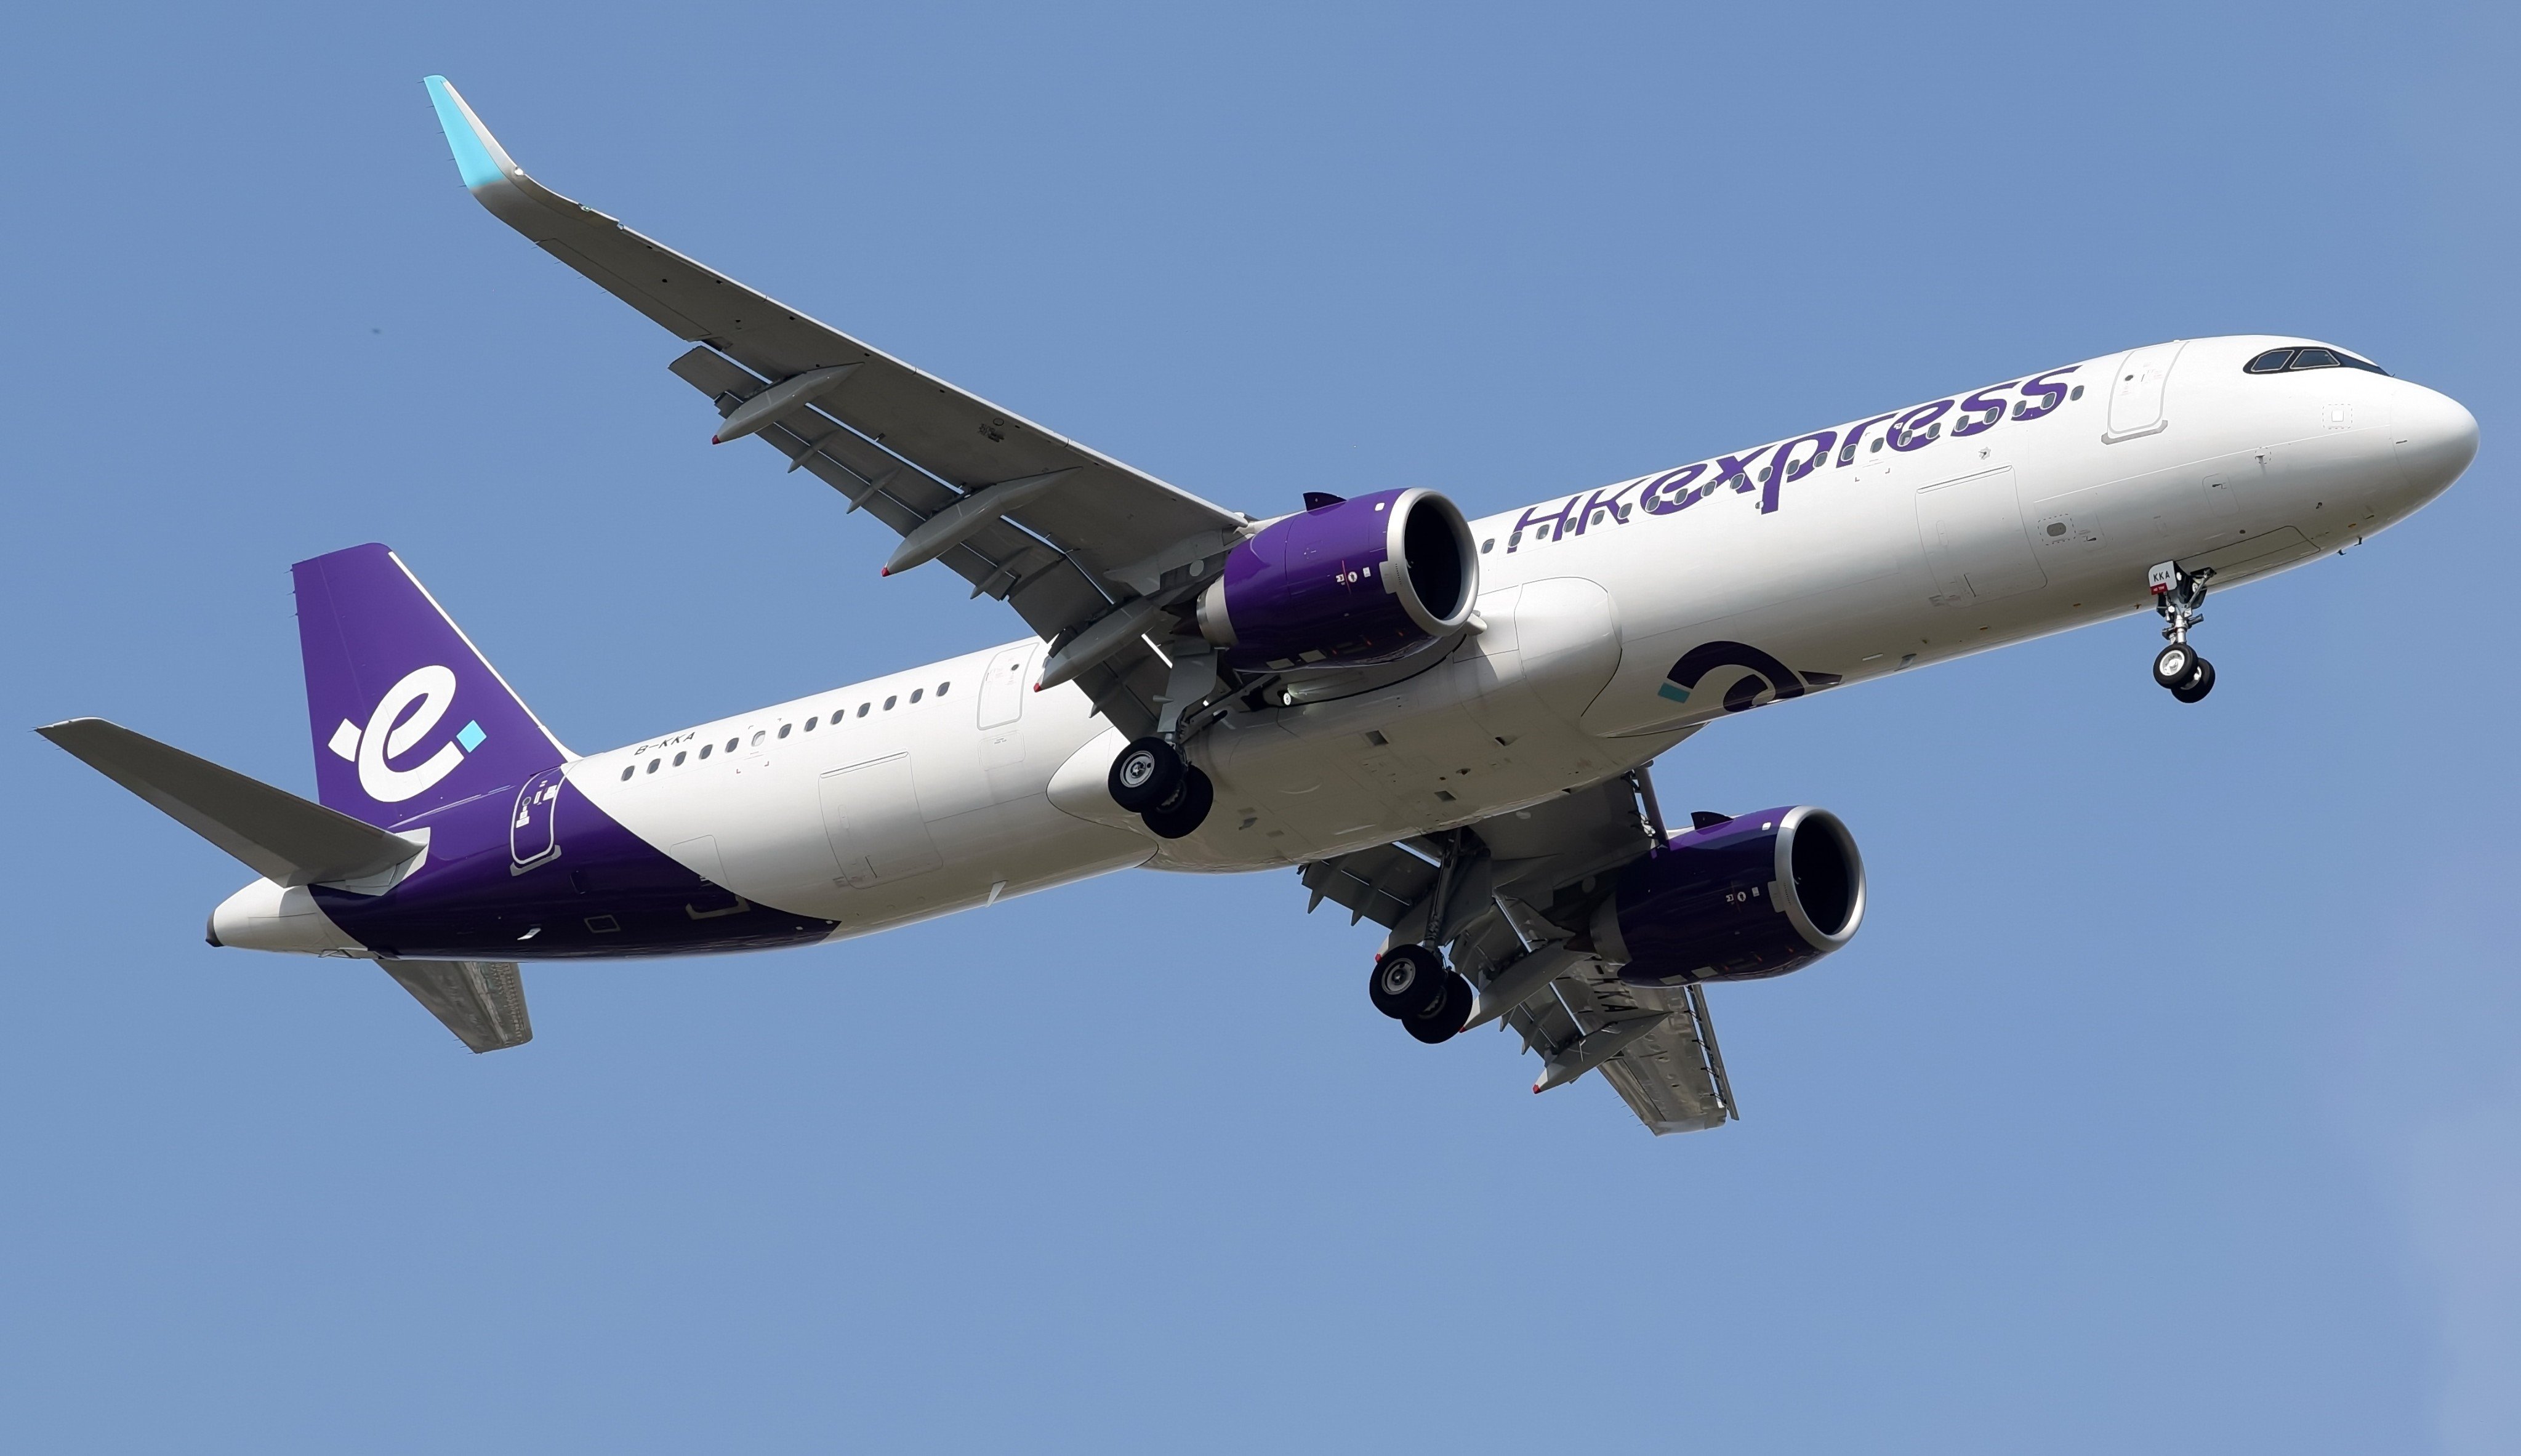 HK Express say the move will give customers more options when they travel. Photo: Shutterstock